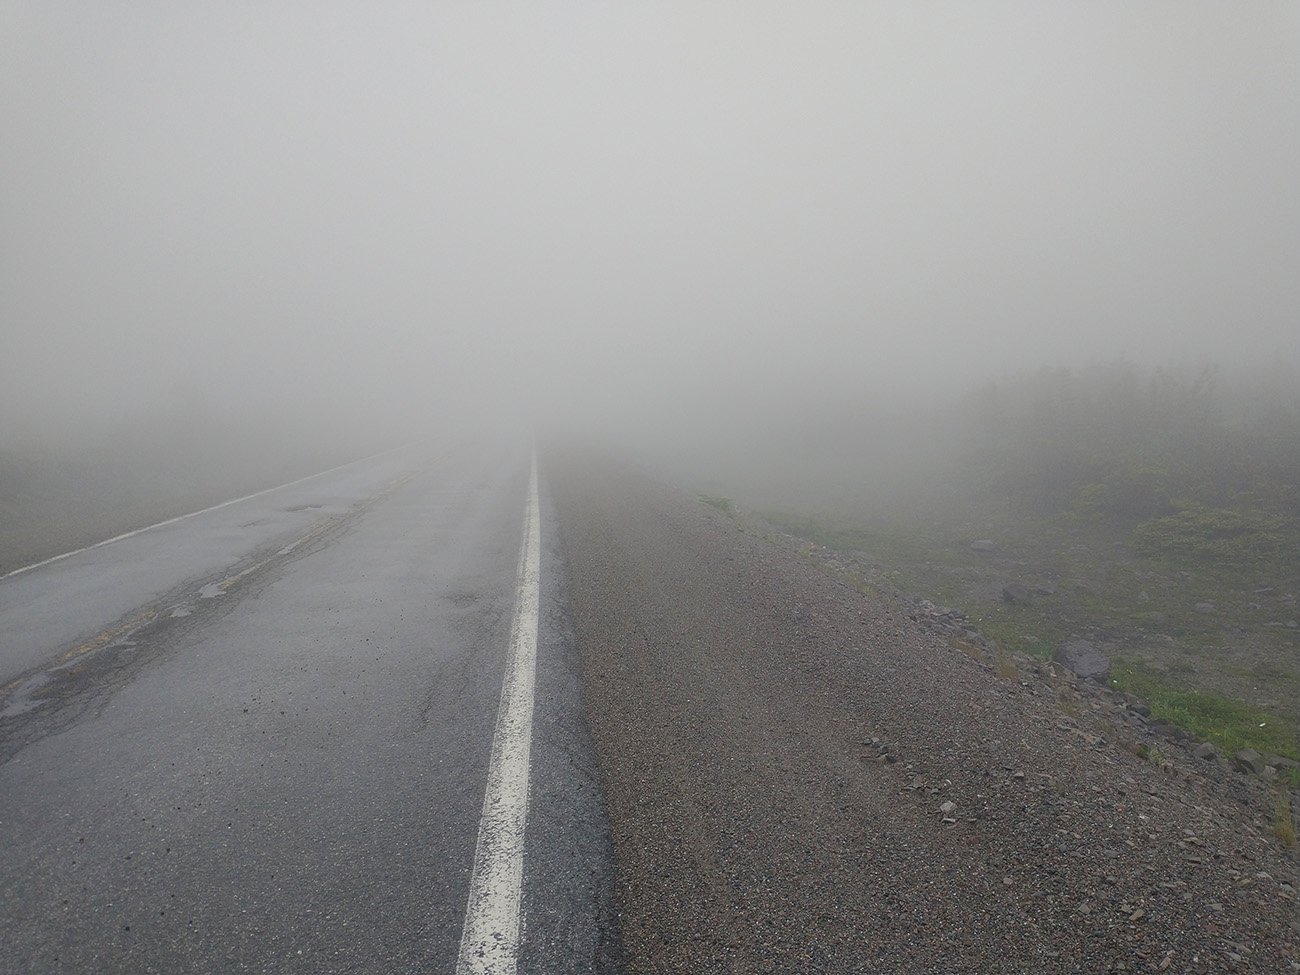 This fog was thick... No one but me was there today. No cars, no bikes. Just me silently rolling in the fog.